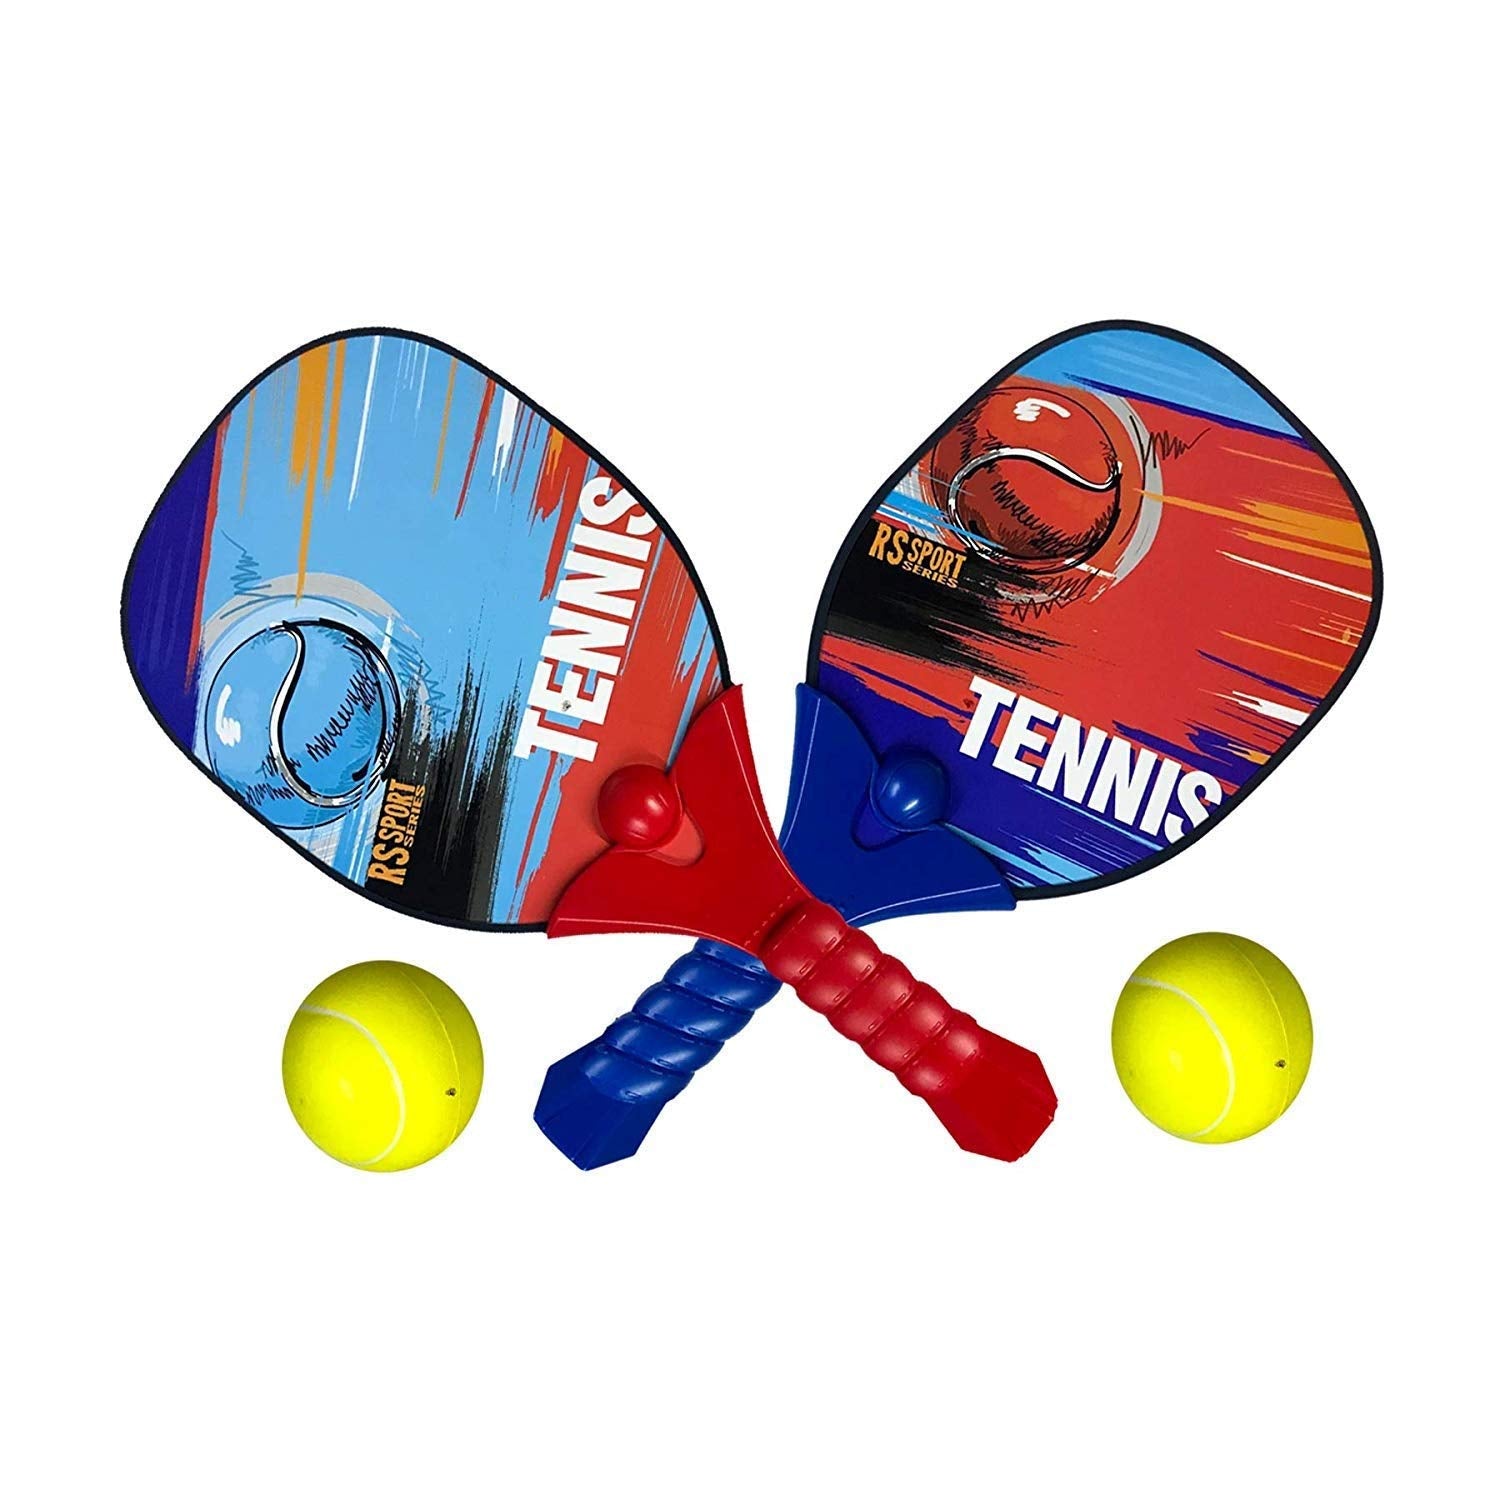 Kid-Friendly Table Tennis Toy Set: 2 Rackets and 2 Foam Balls for kids